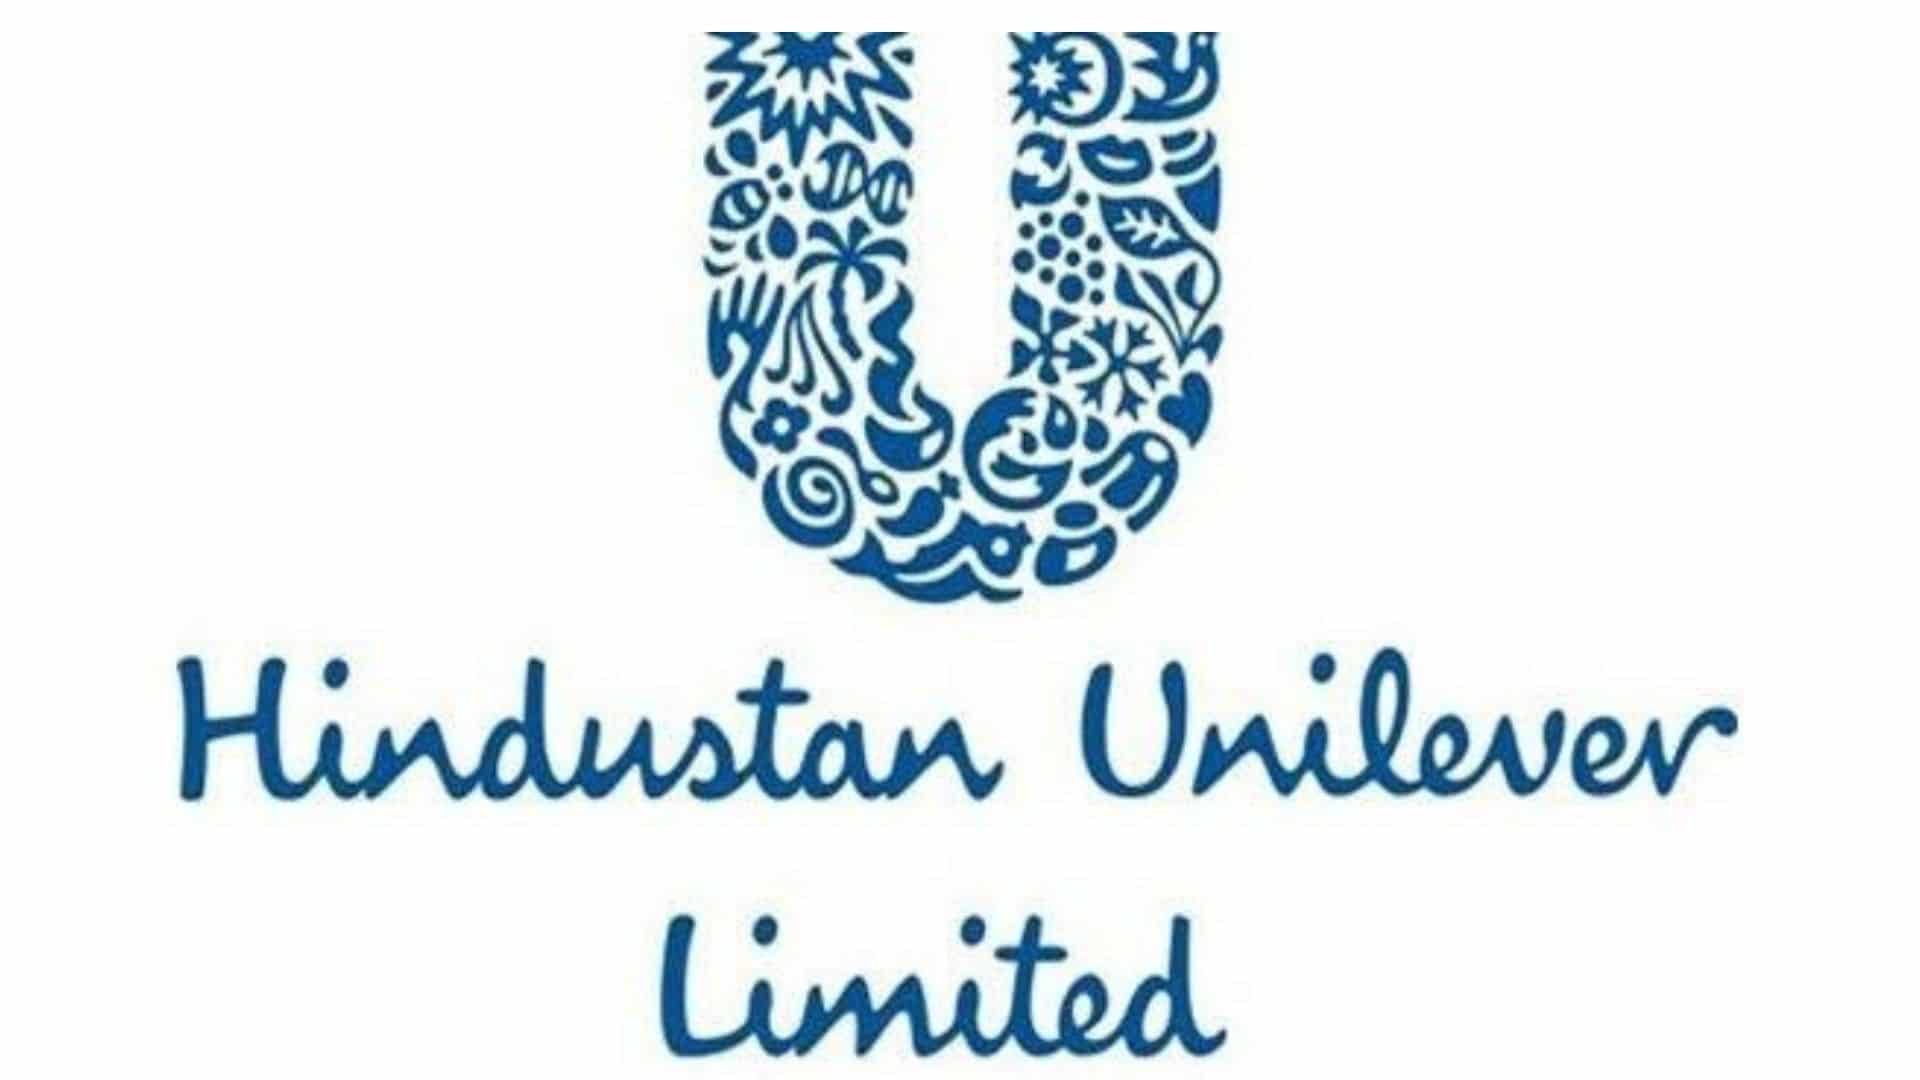 The Success Story Of FMCG Giant Hindustan Unilever Limited (HUL)